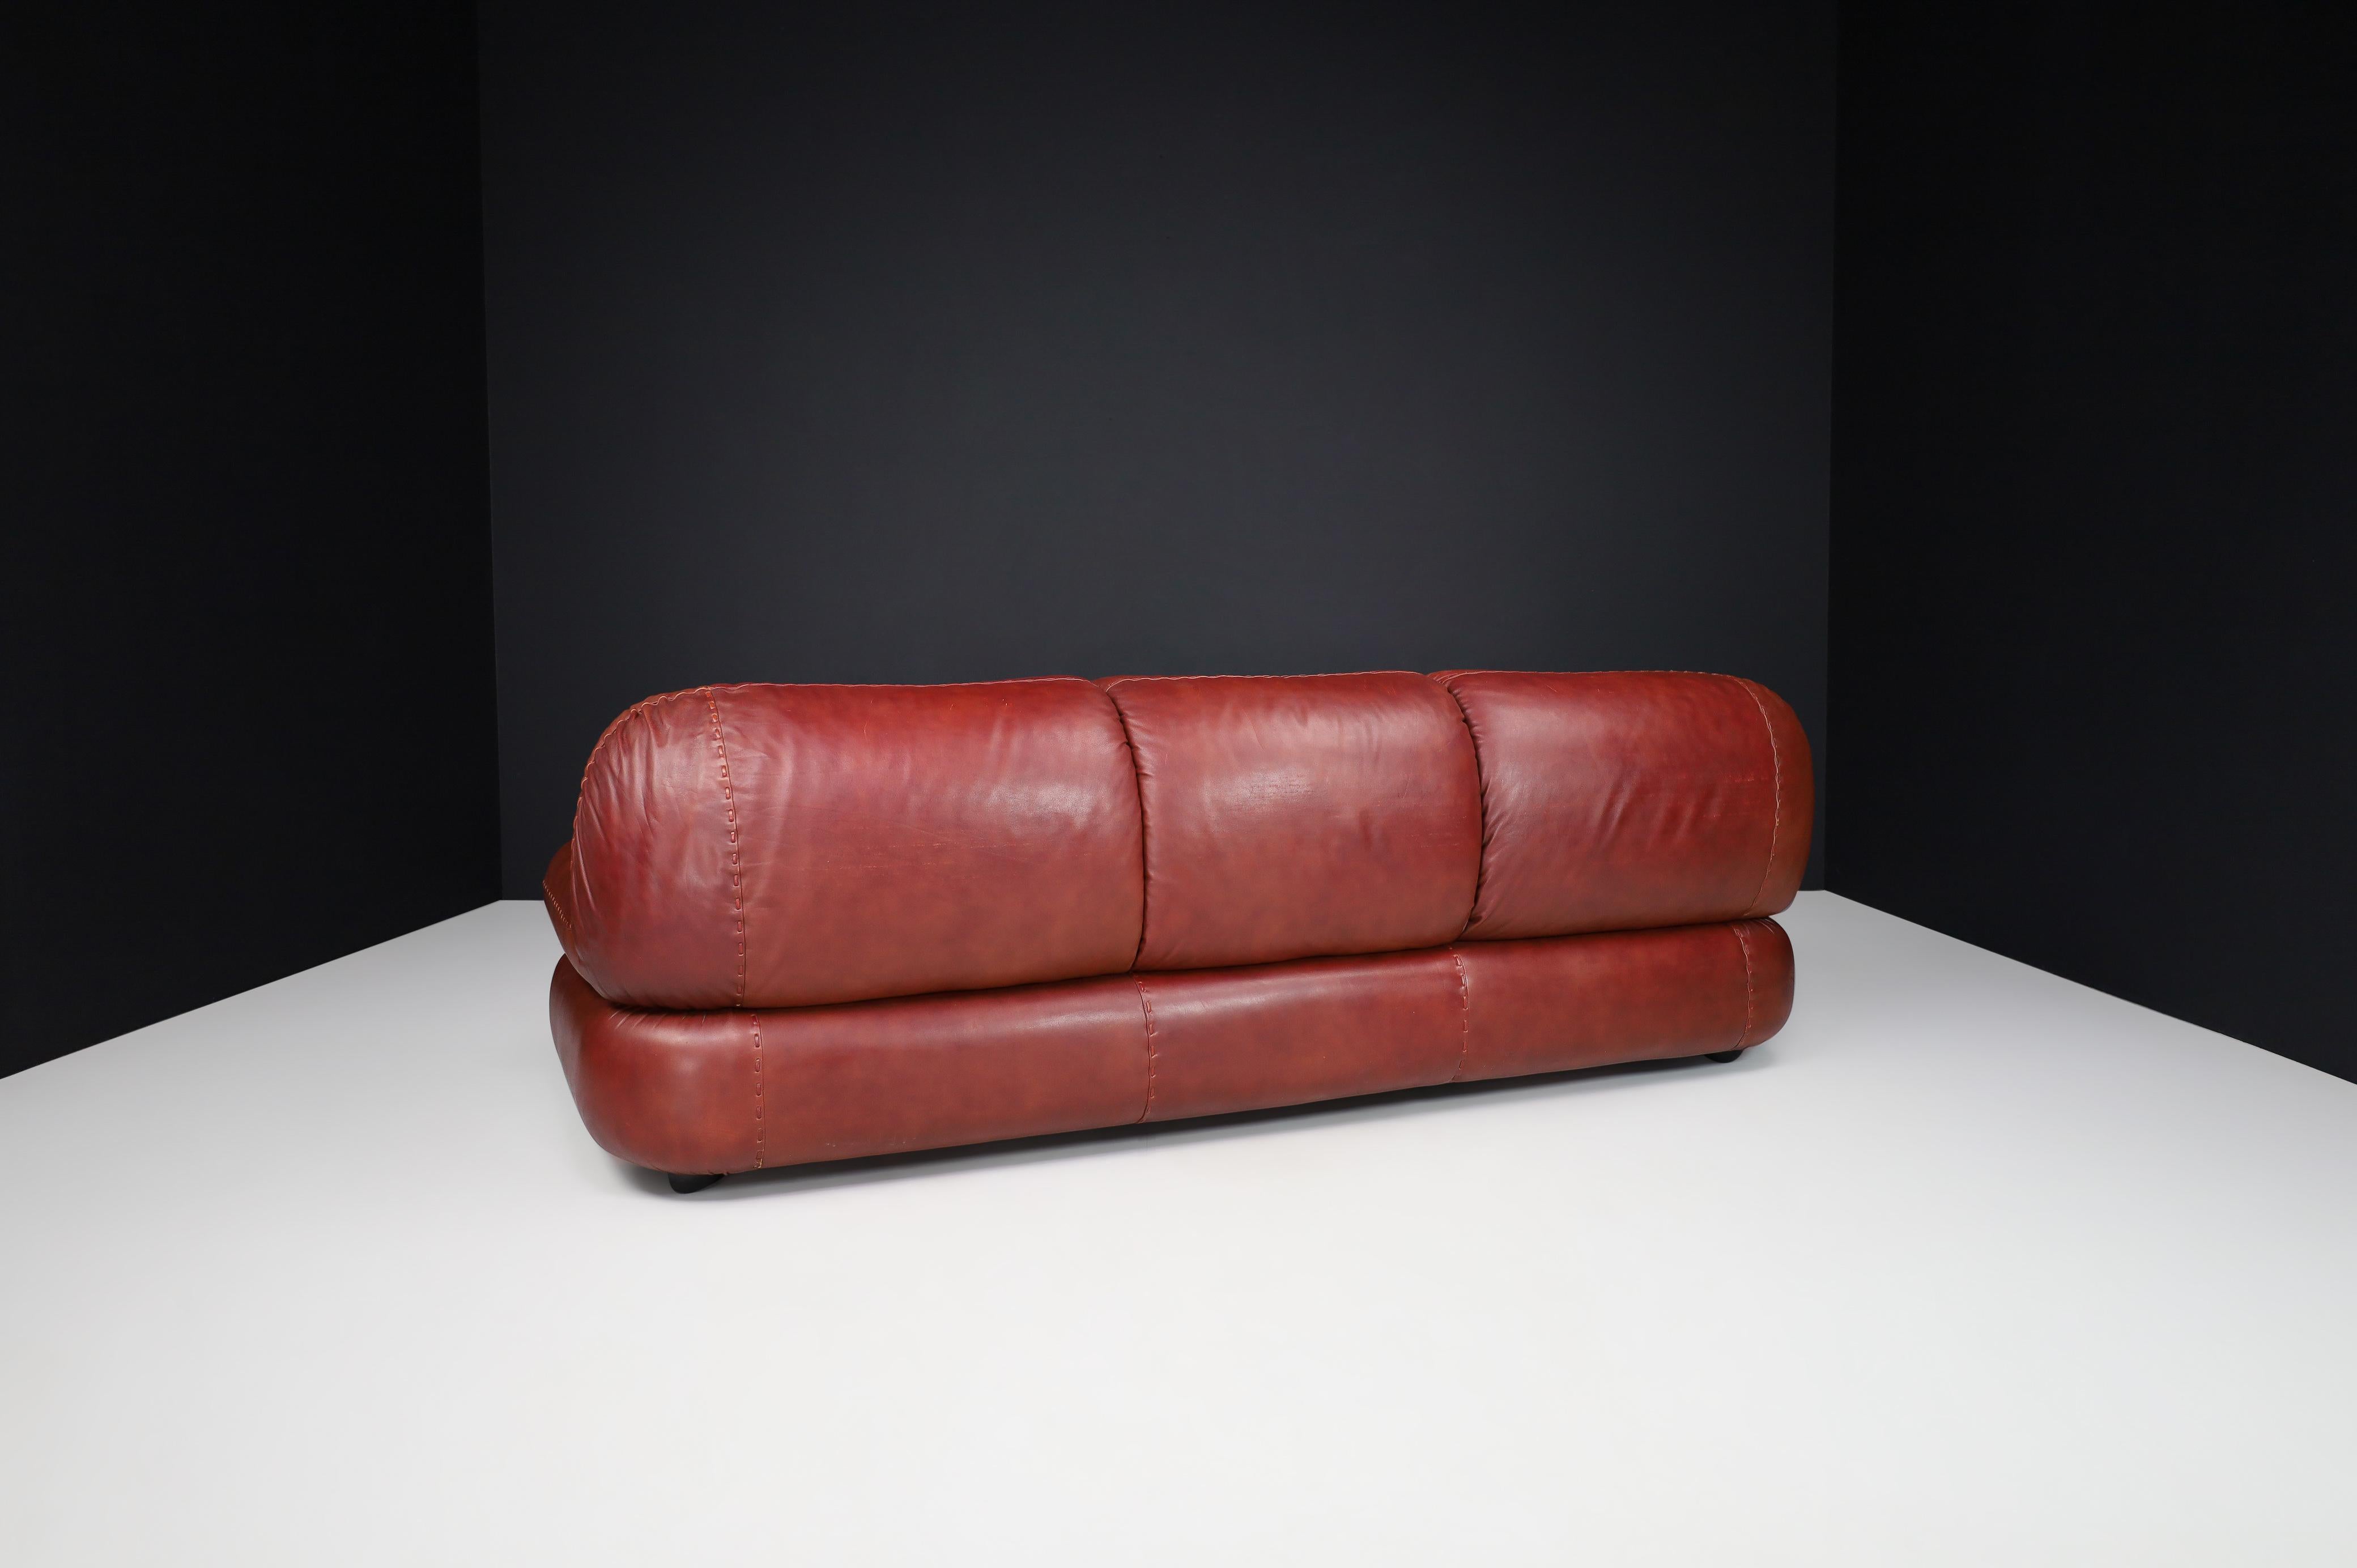 Large Lounge Sofa in Firebrick Leather by Sapporo for Mobil Girgi, Italy, 1970 For Sale 2